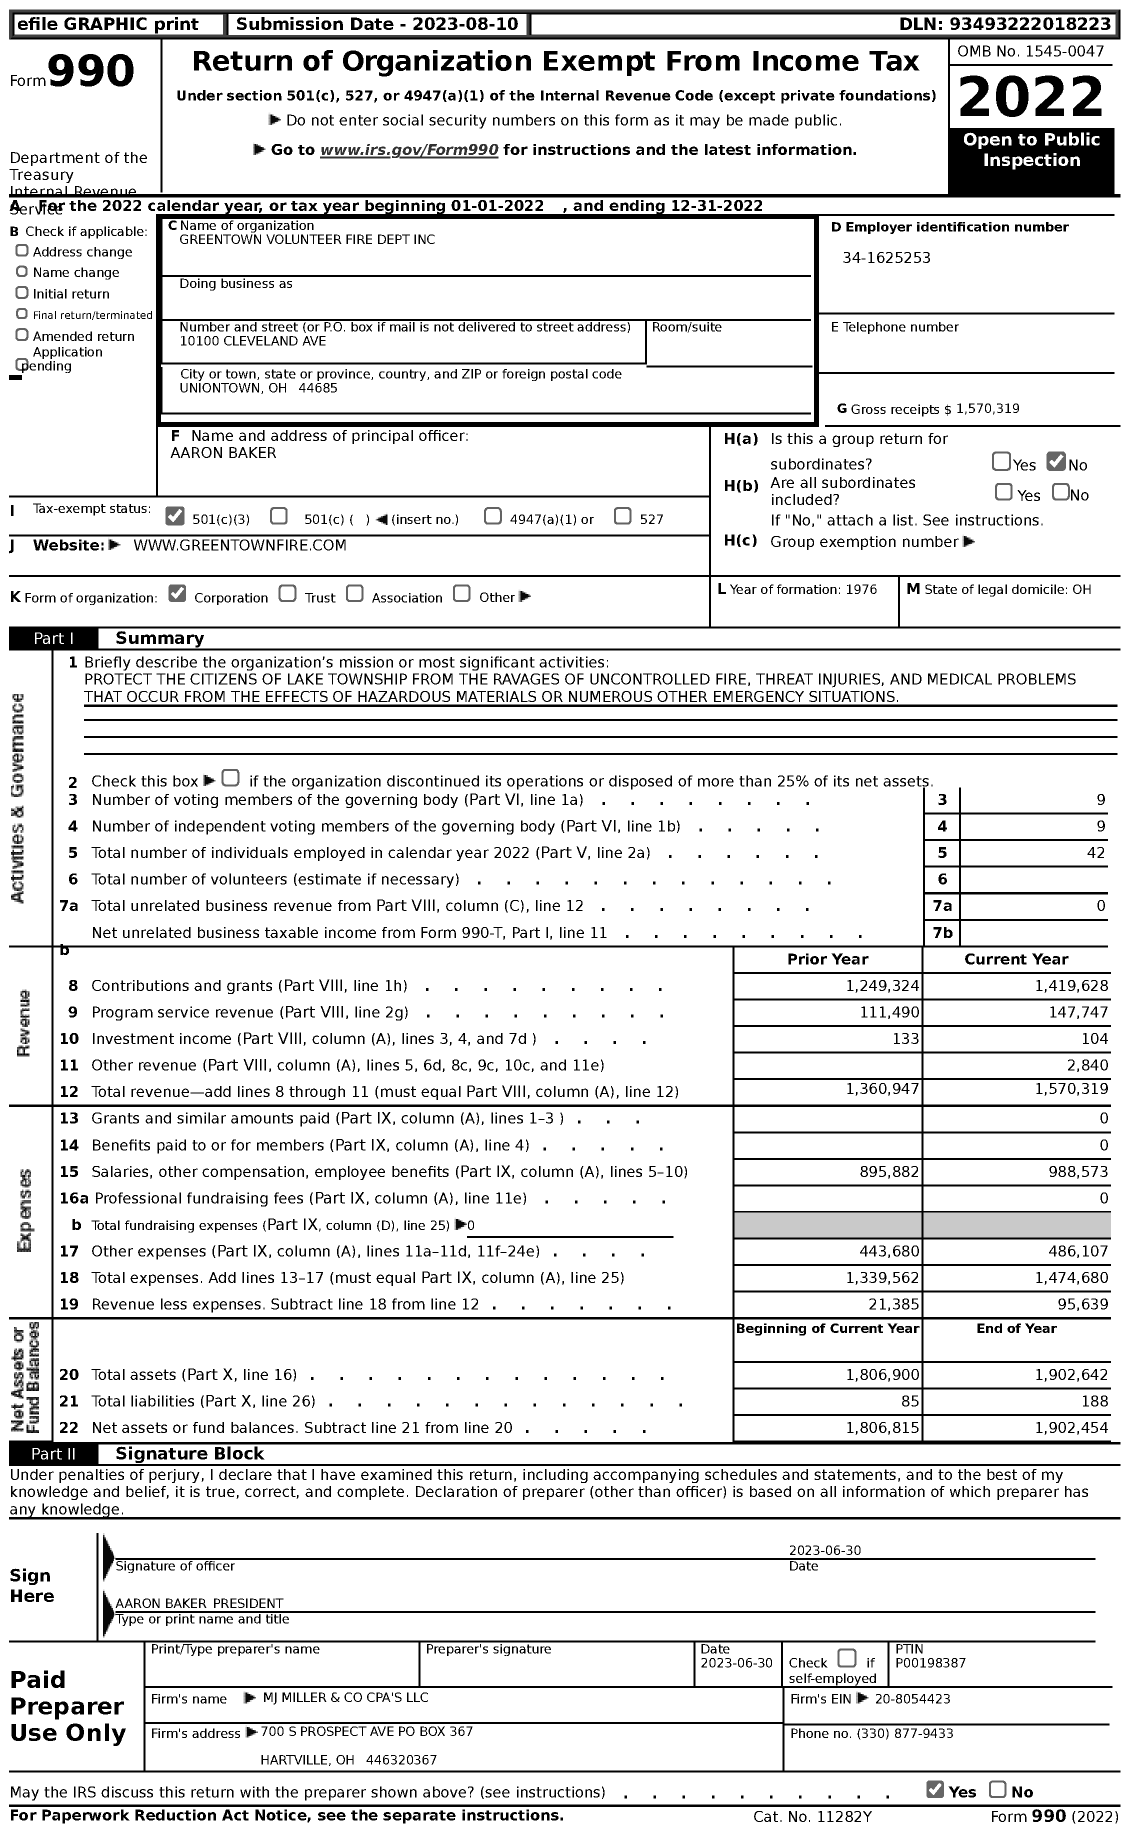 Image of first page of 2022 Form 990 for Greentown Volunteer Fire Dept